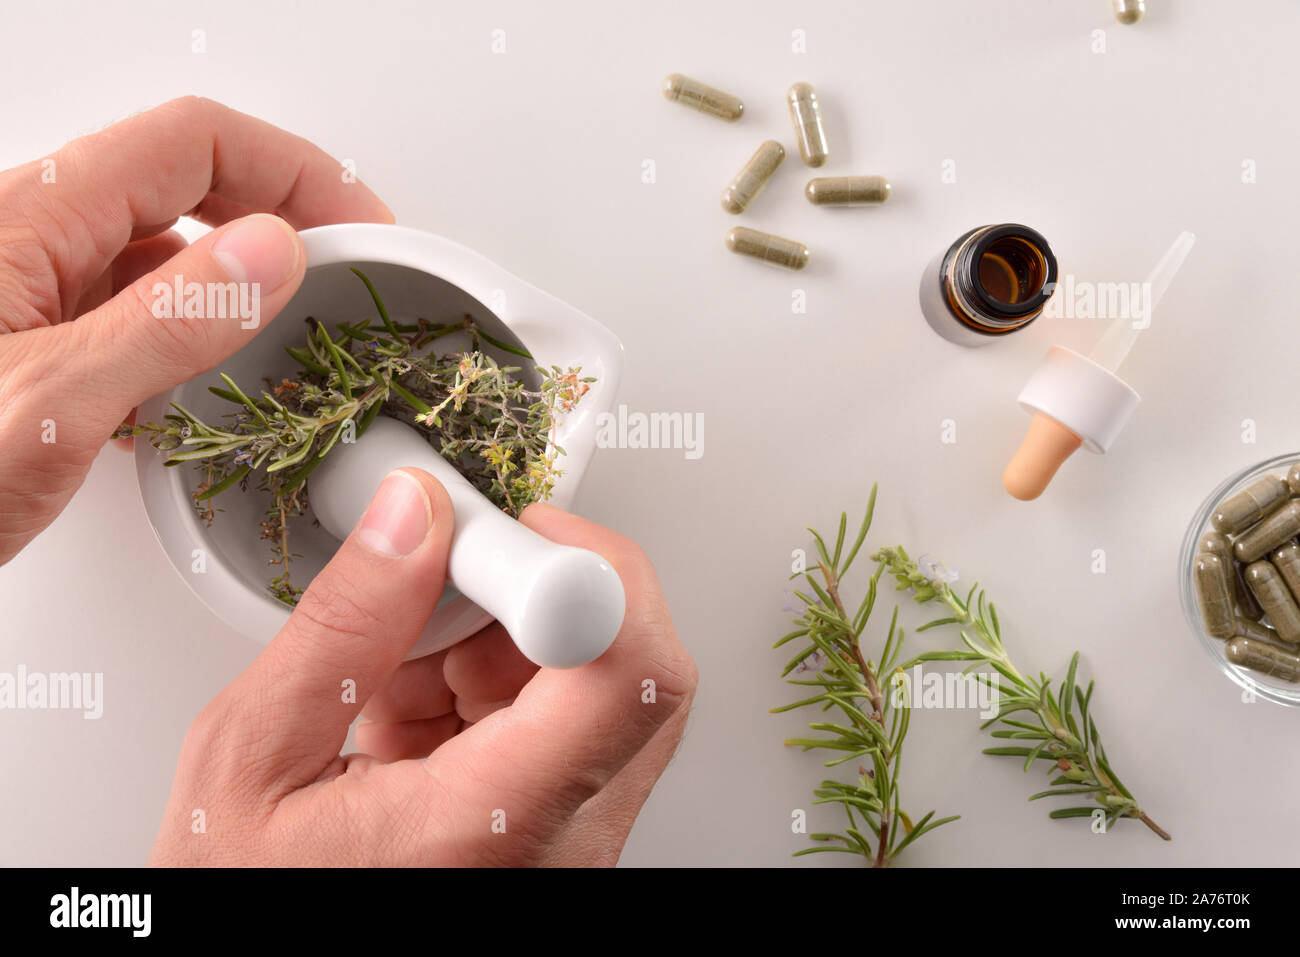 Hands elaborating alternative medicine with plants with mortar on white table. Alternative natural medicine concept. Top view. Horizontal composition. Stock Photo